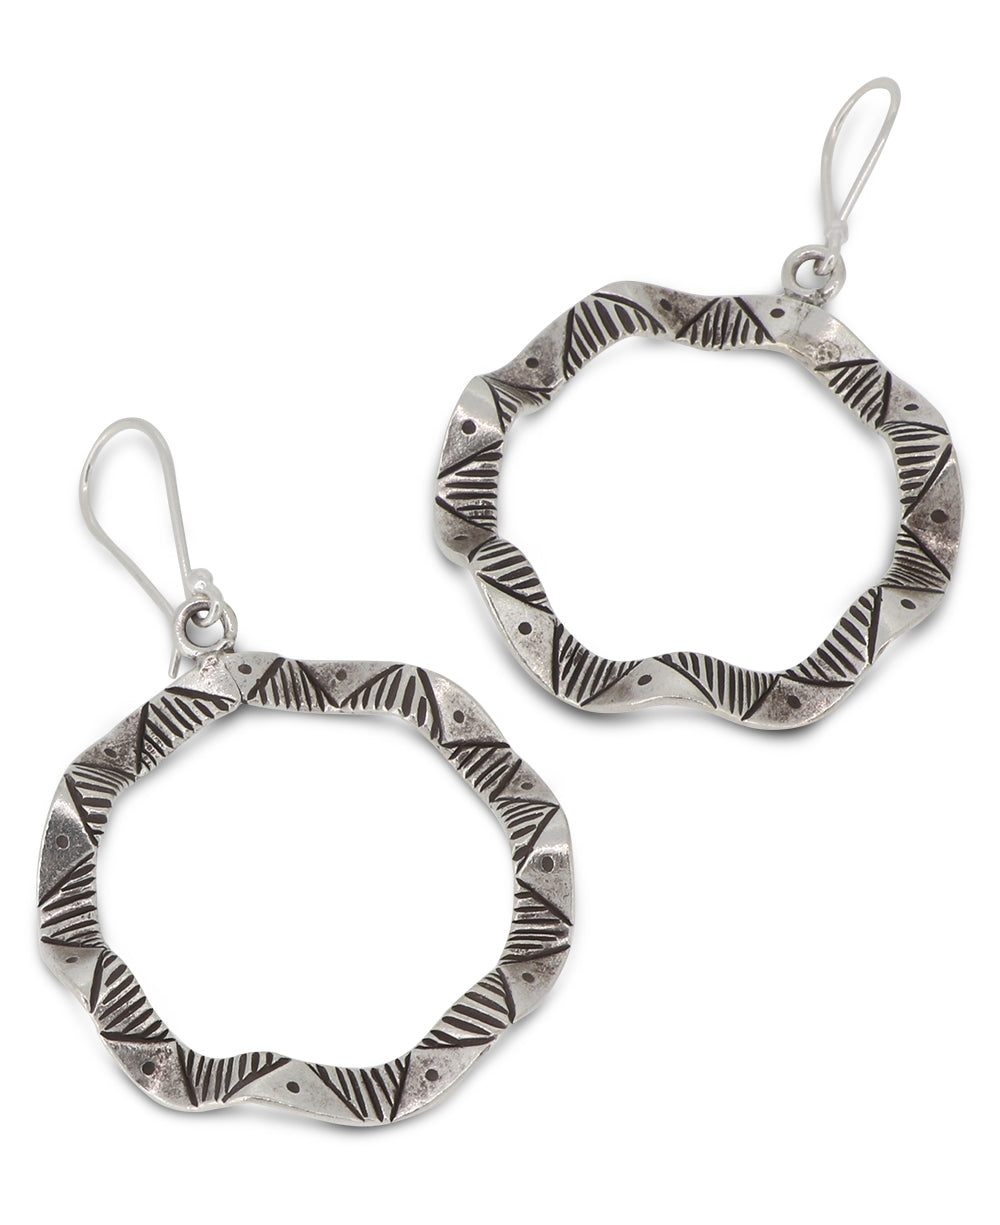 Handcrafted silver circular wavy earrings inspired by Laotian culture and artistry